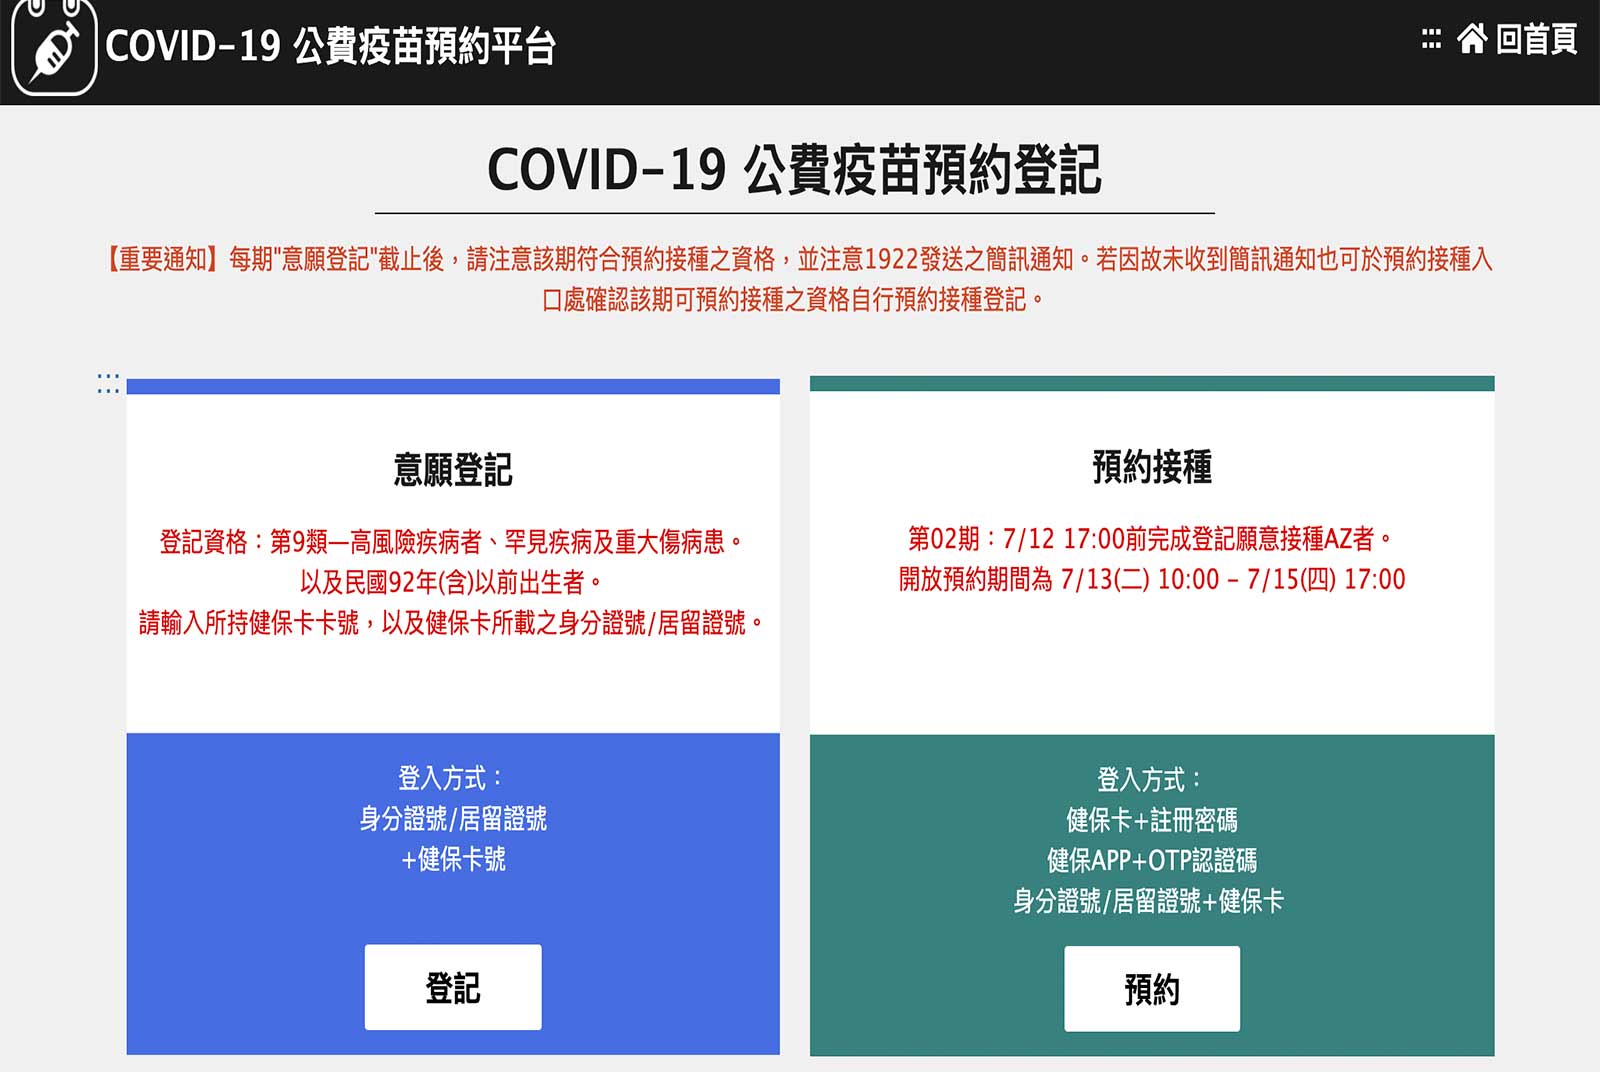 The 21st round of vaccination registration will be open from January 26 to 28. (Photo / Retrieved from COVID-19 vaccination registration platform)